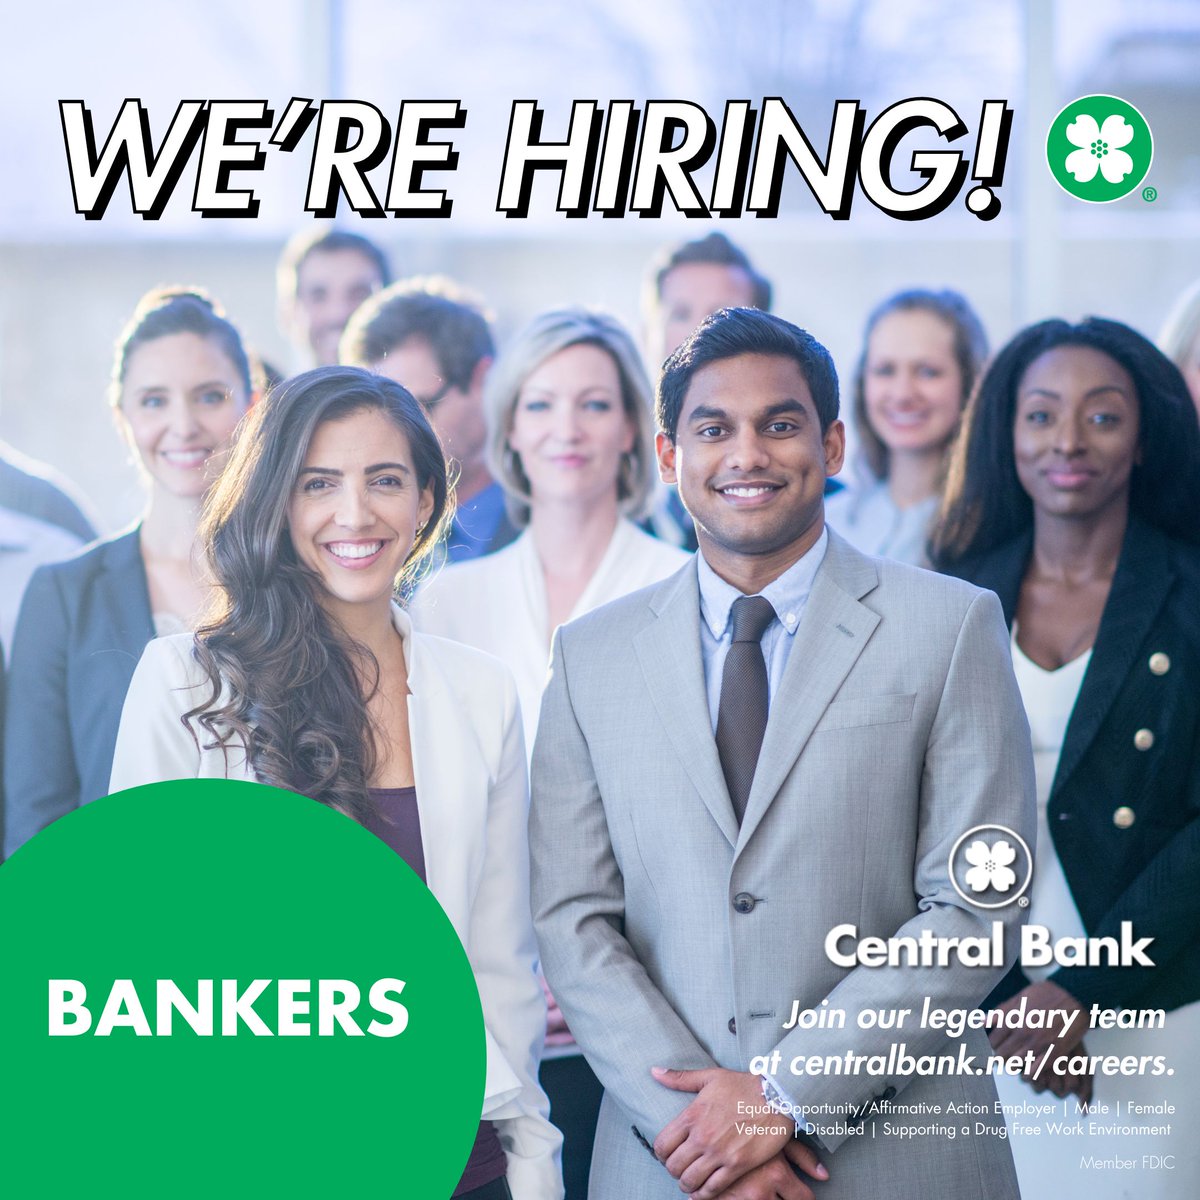 Central Bank isn't looking for job seekers. We want changemakers! We are actively seeking Bankers. Do you want to be a part of a living legendary team? Head to the link below to apply. 

centralbank.net/careers/
#LivingLEGENDARY #CBMWProud #workwithus